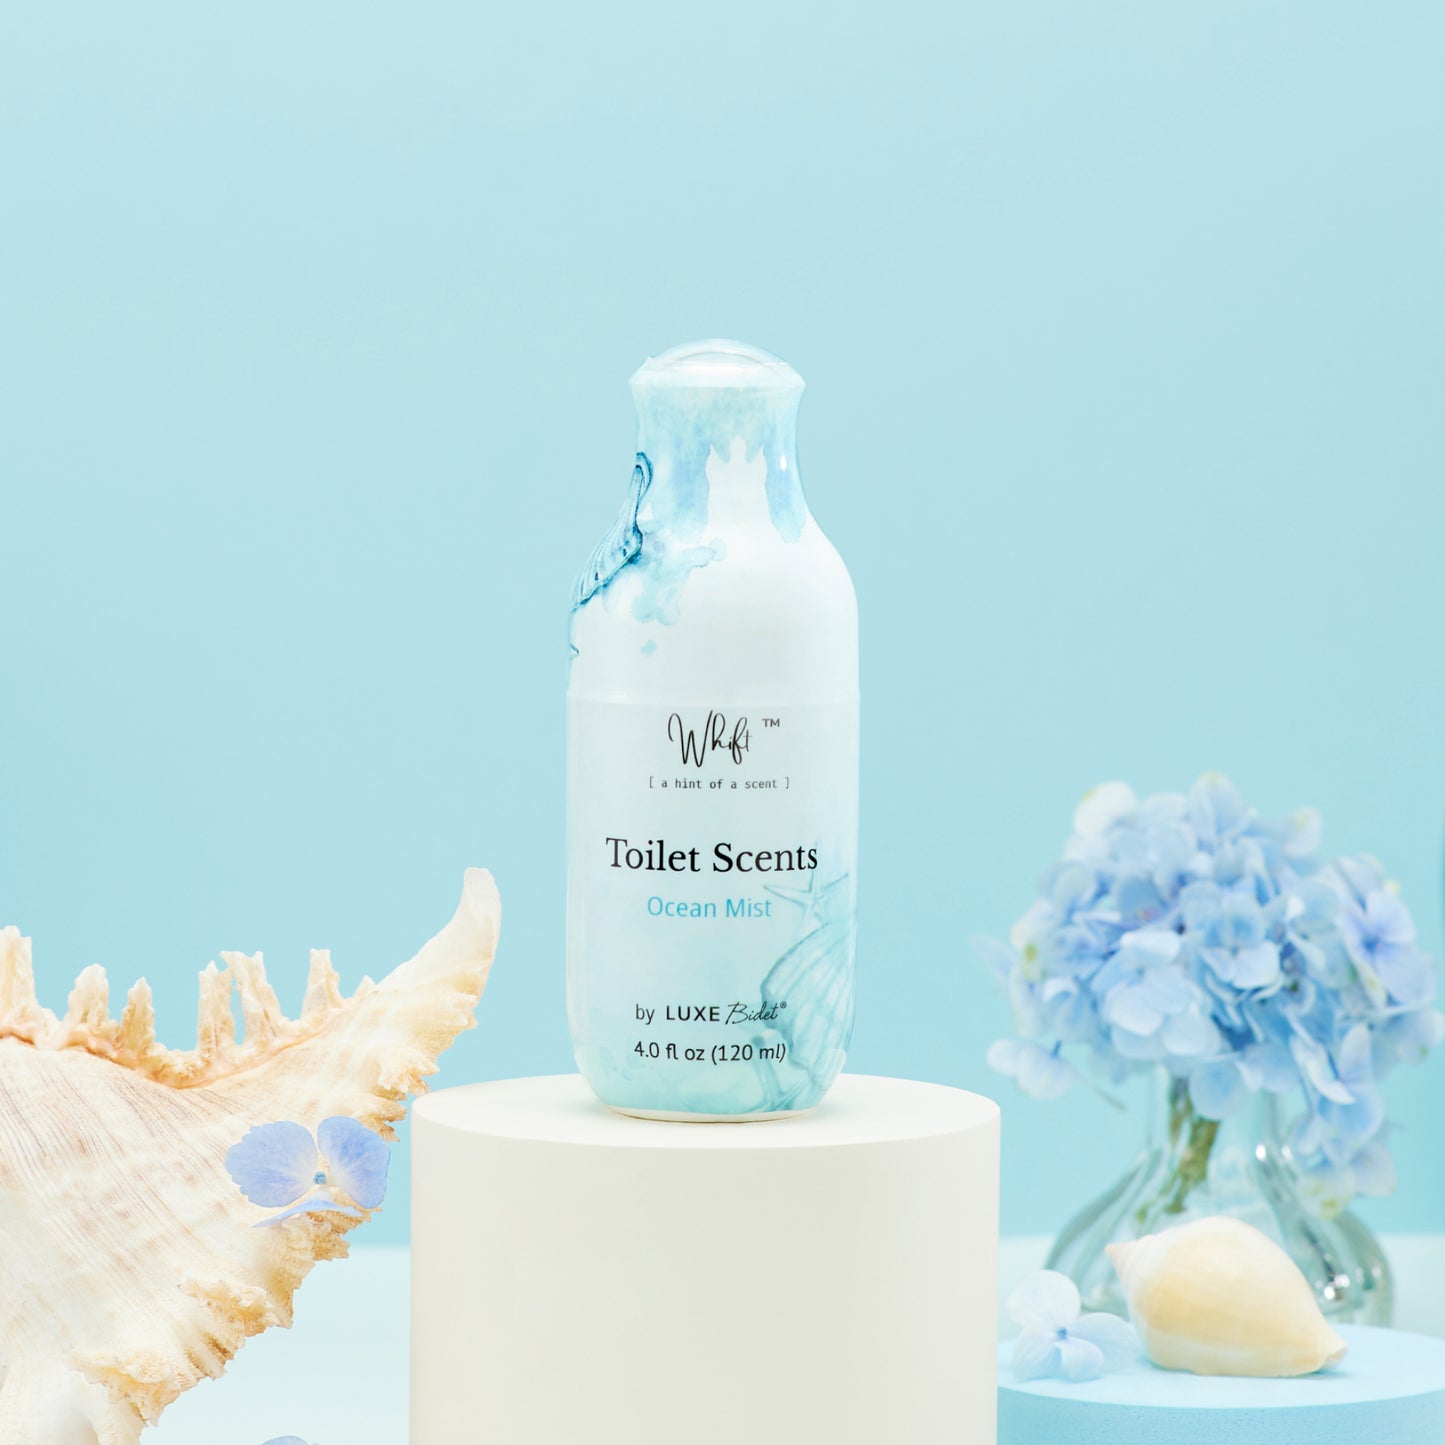 120 mL Ocean Mist Whift Toilet Scents Spray on a platform with flowers and shells around it